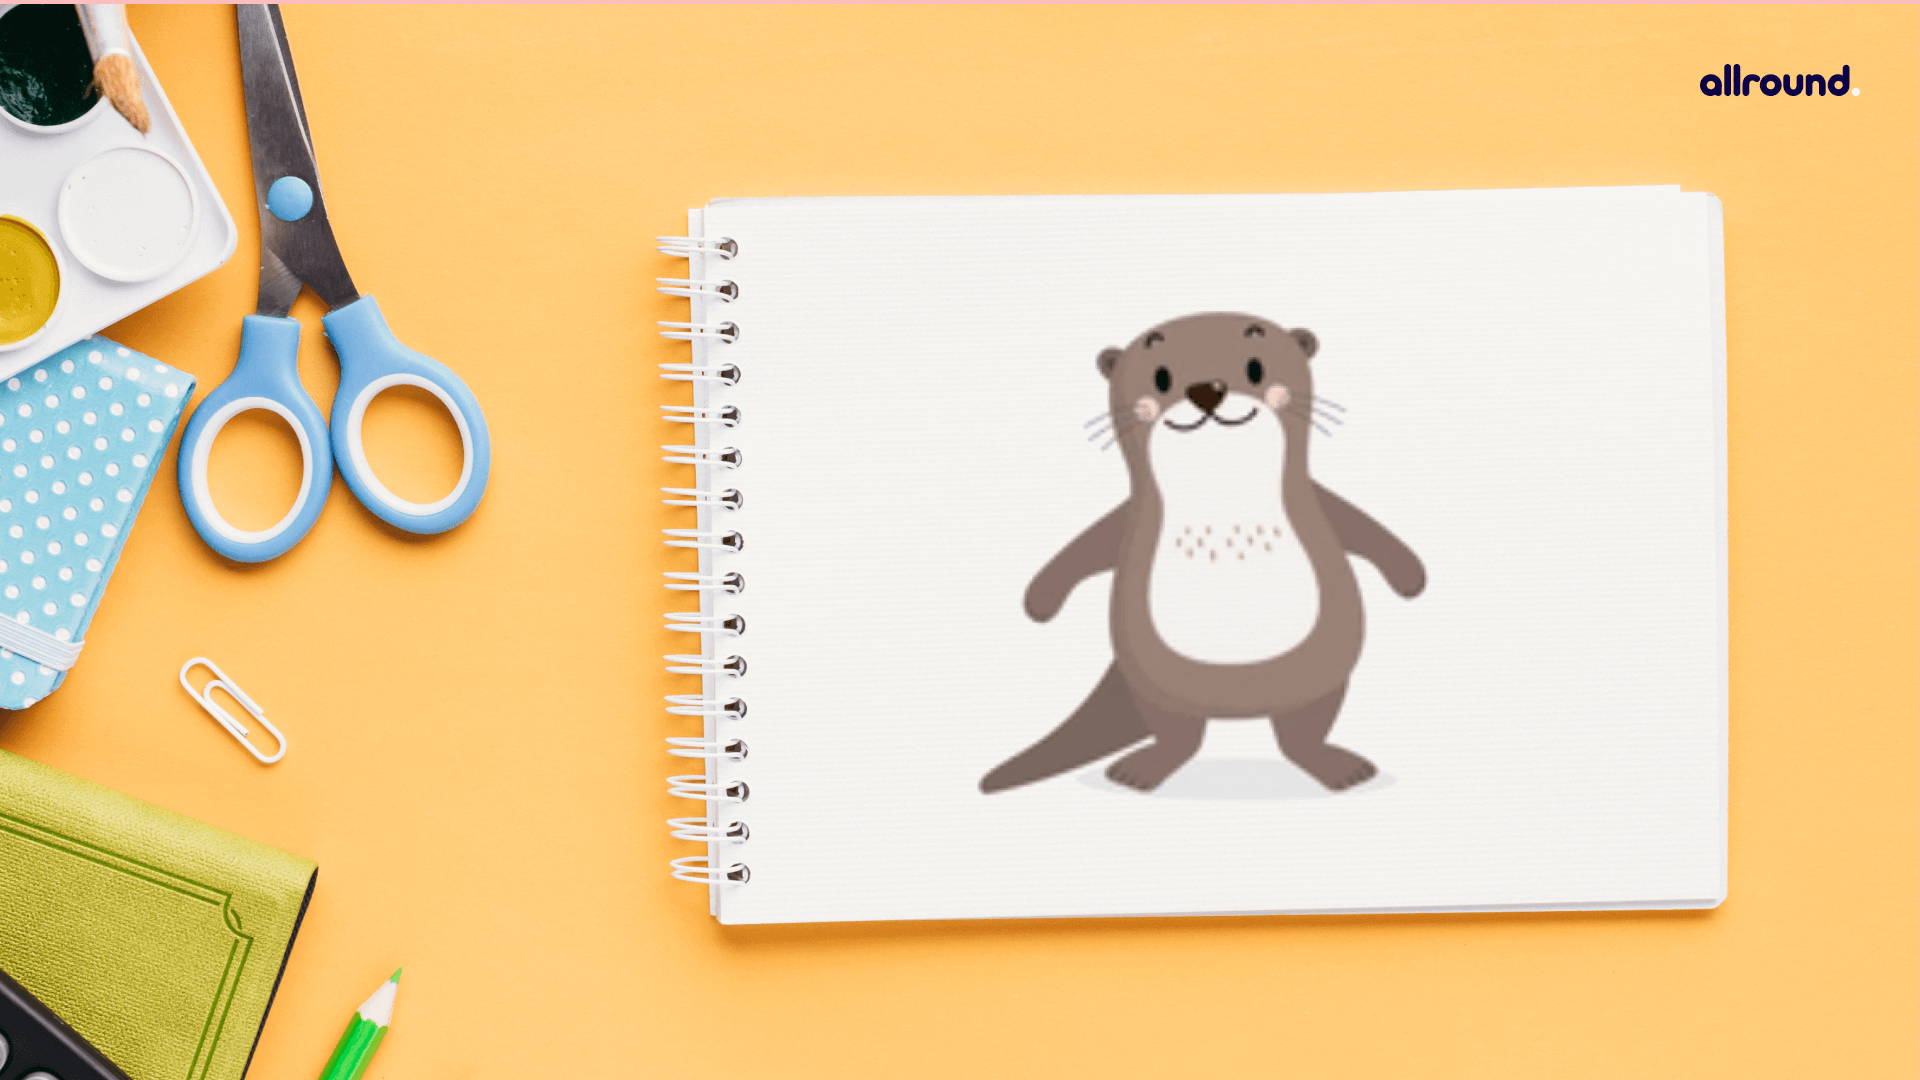 How to Draw a Sea Otter? Step by Step Drawing Guide for Kids